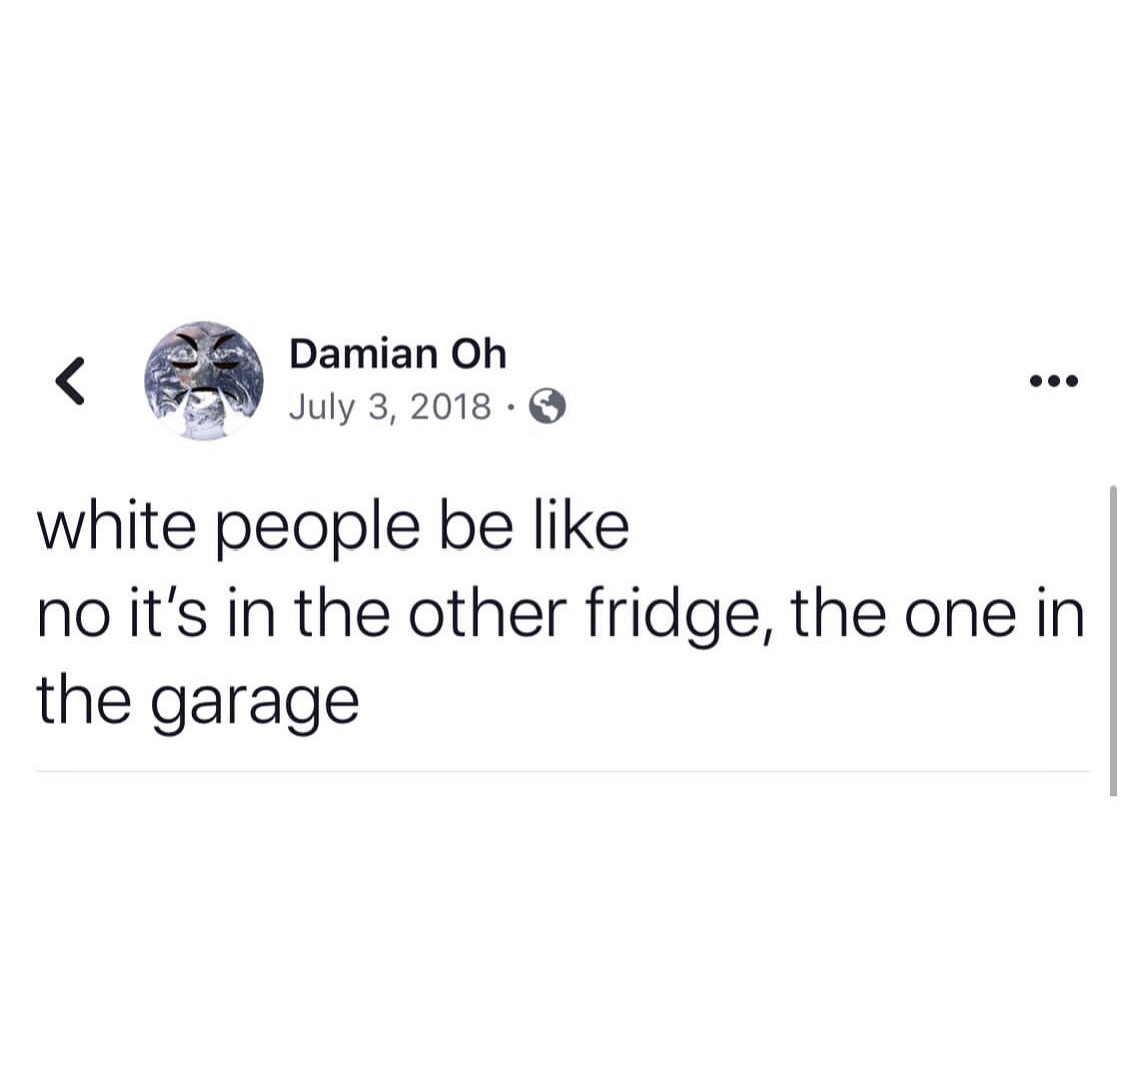 people who back into spots - Damian Oh white people be no it's in the other fridge, the one in the garage